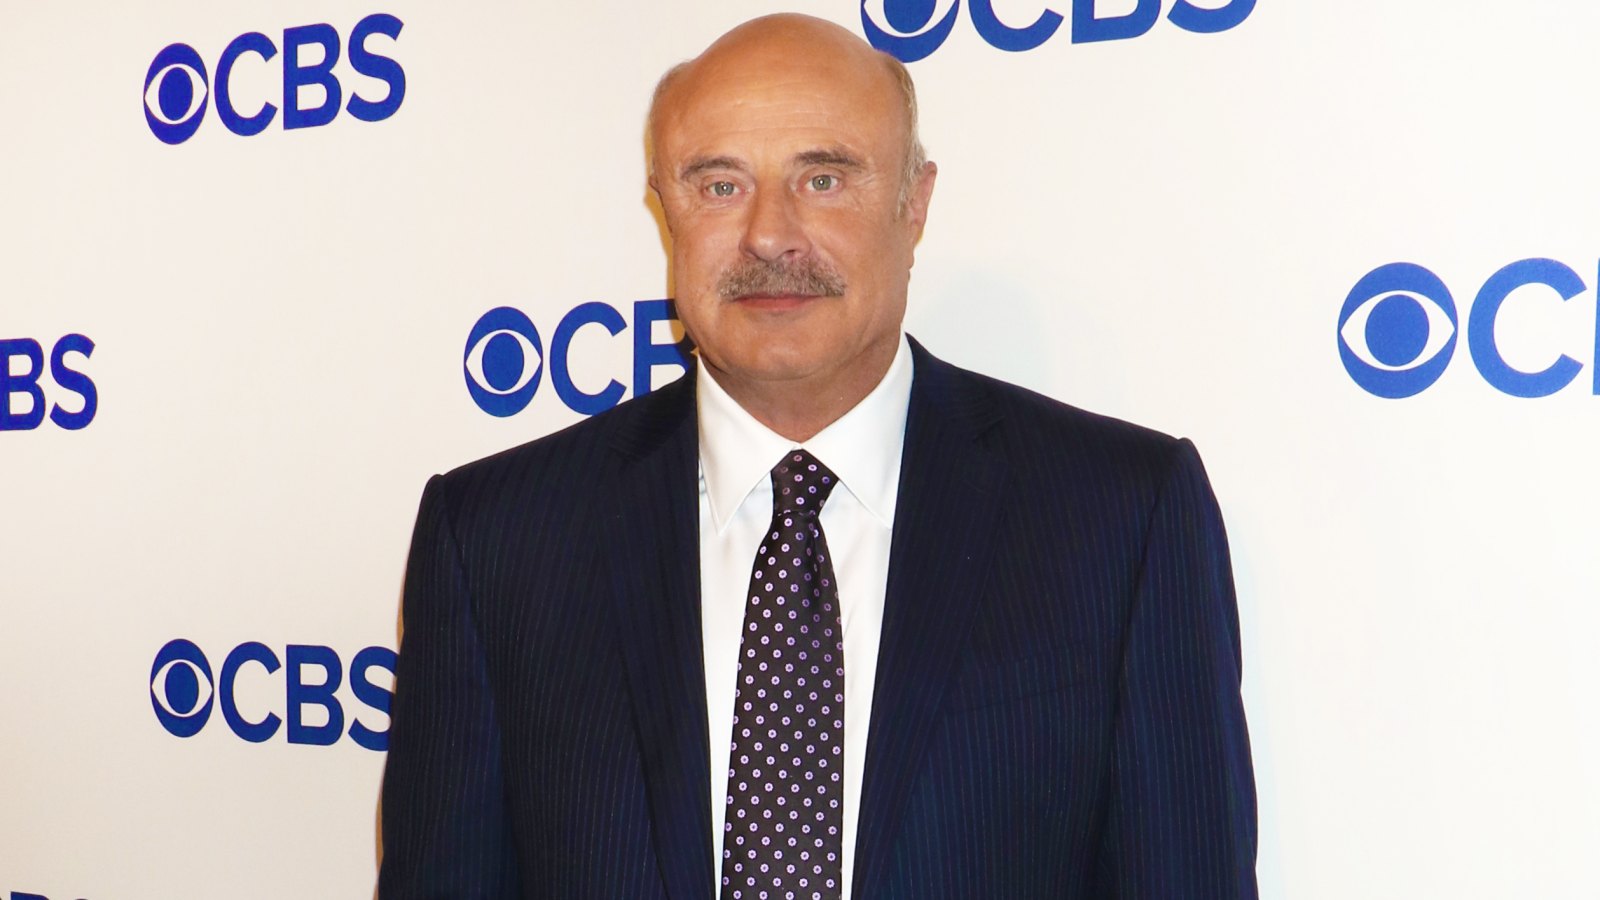 Dr. Phil Apologizes for Comparing Coronavirus Deaths to Swimming Pool Deaths